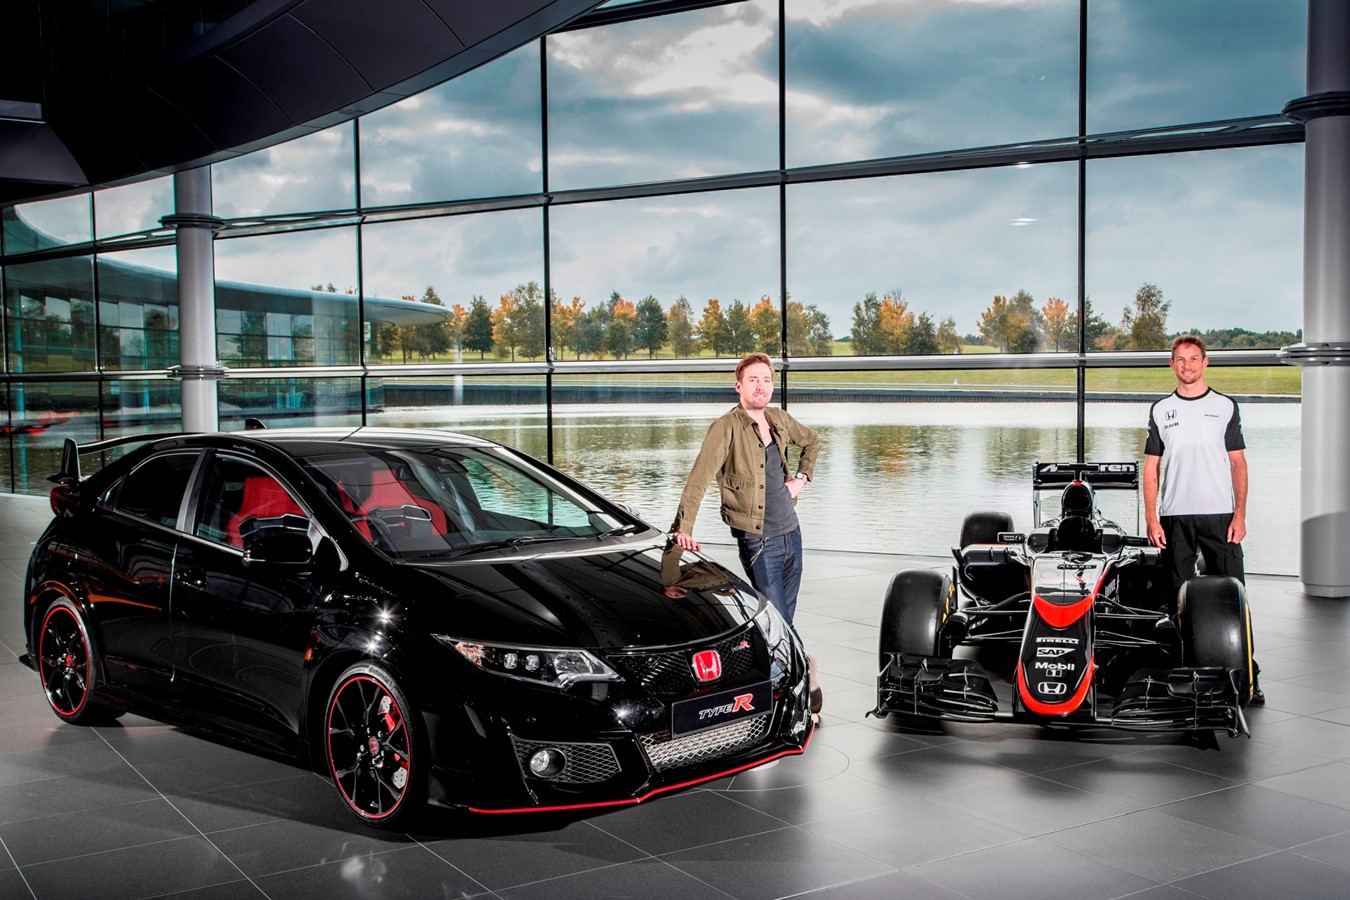 Ricky Wilson gets exclusive tour of McLaren Technology Centre from Jenson Button